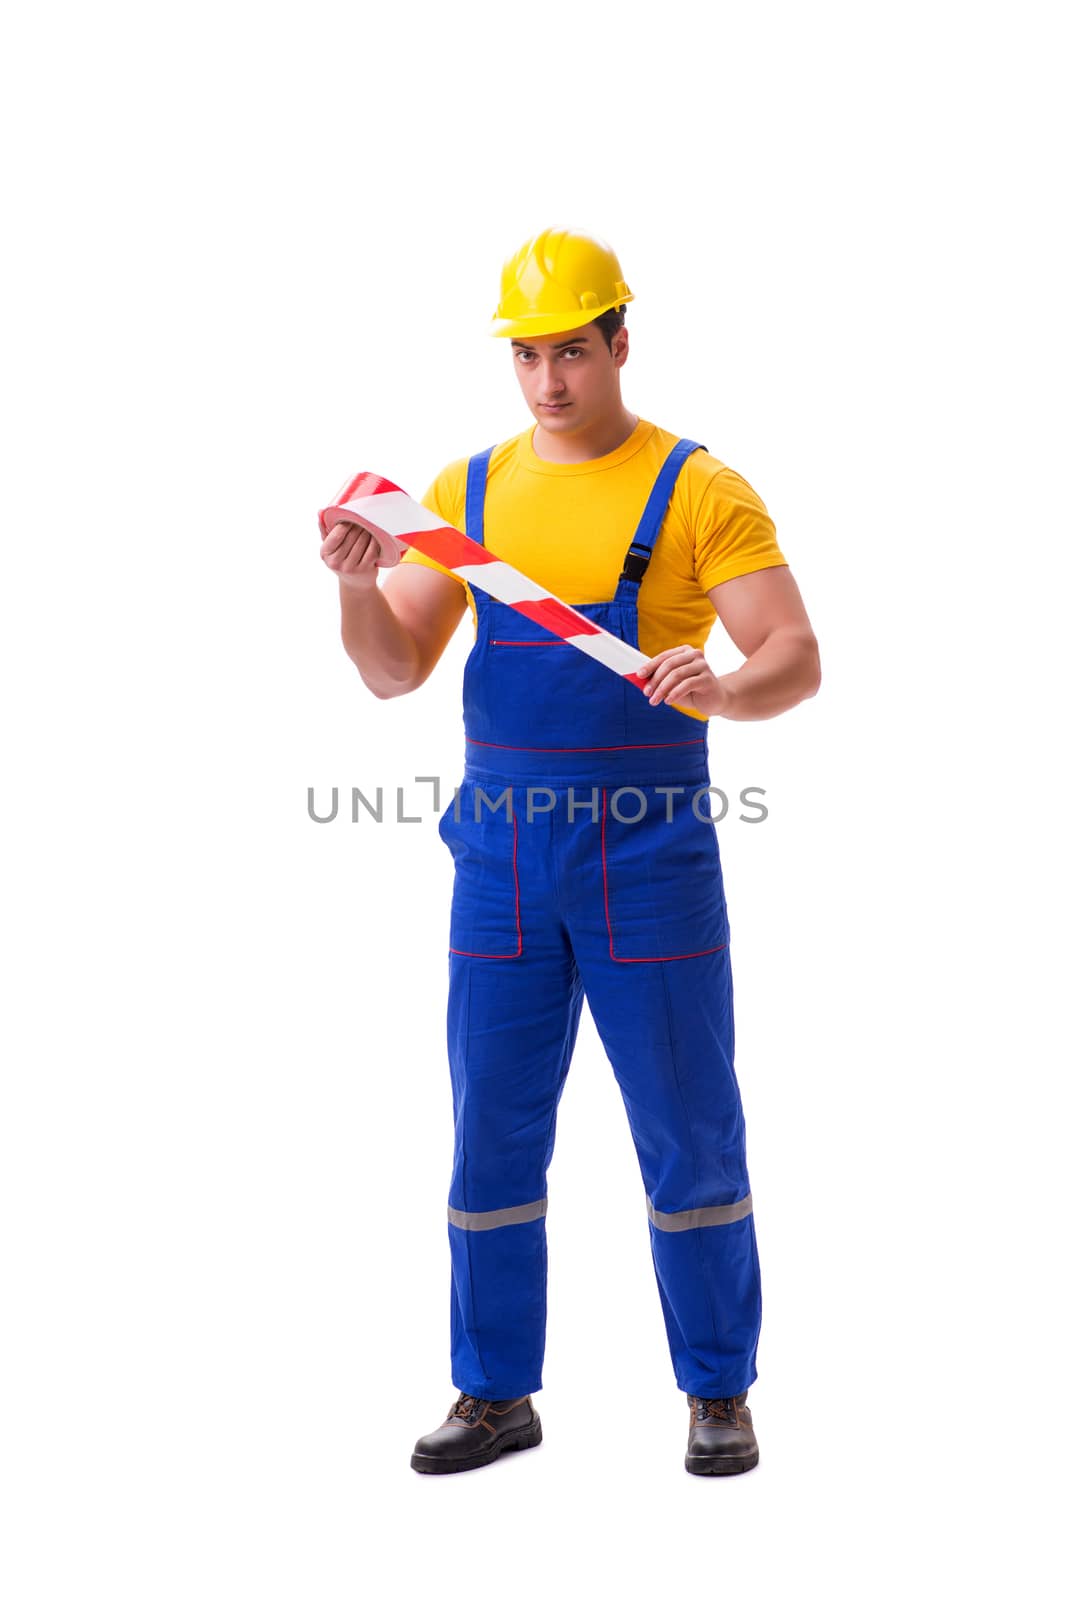 Funny worker wearing coveralls with tape by Elnur